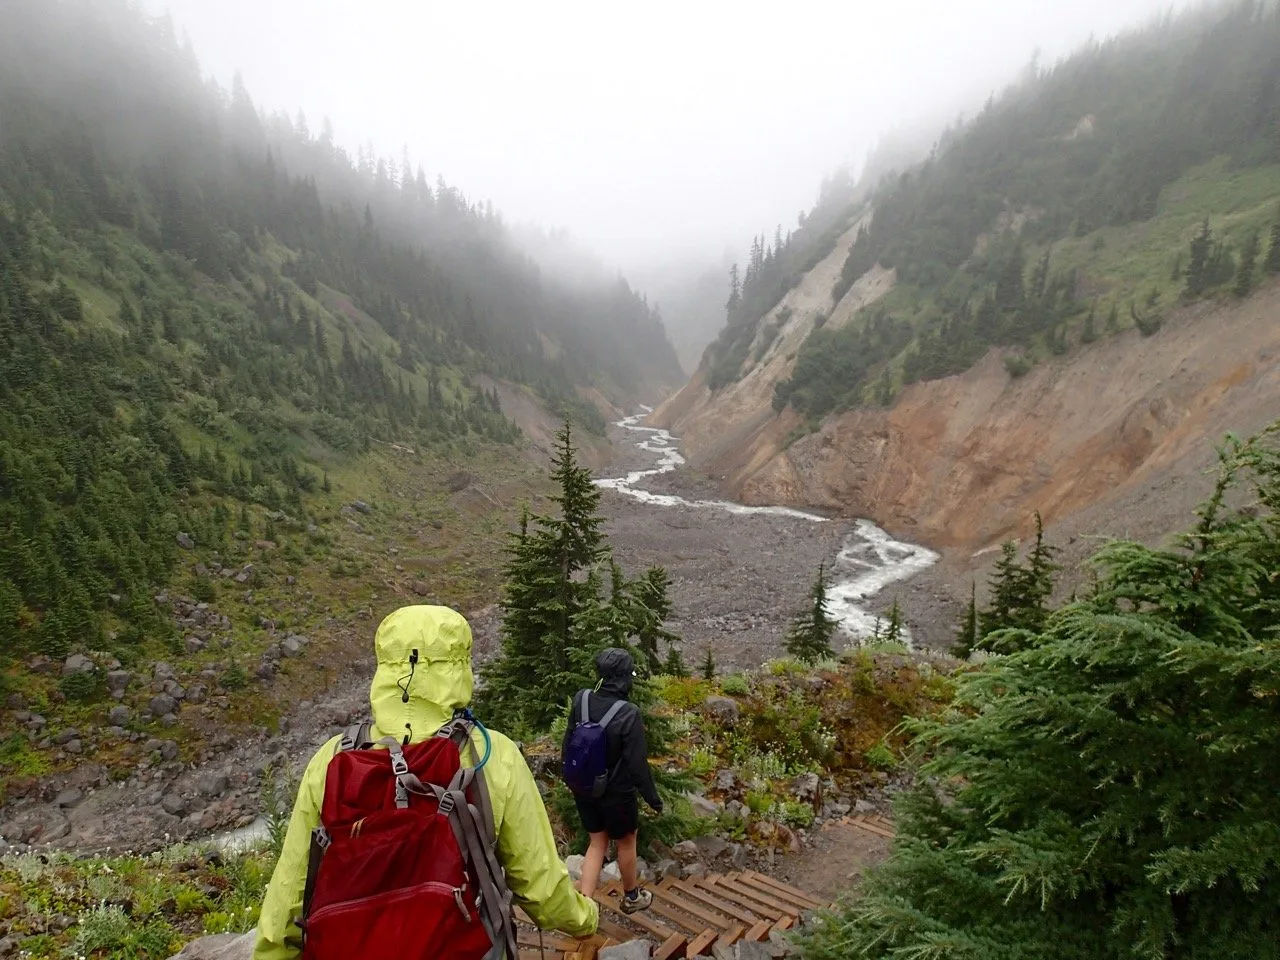 A hiker in a yellow jacket hikes towards a creek in the mist and rain